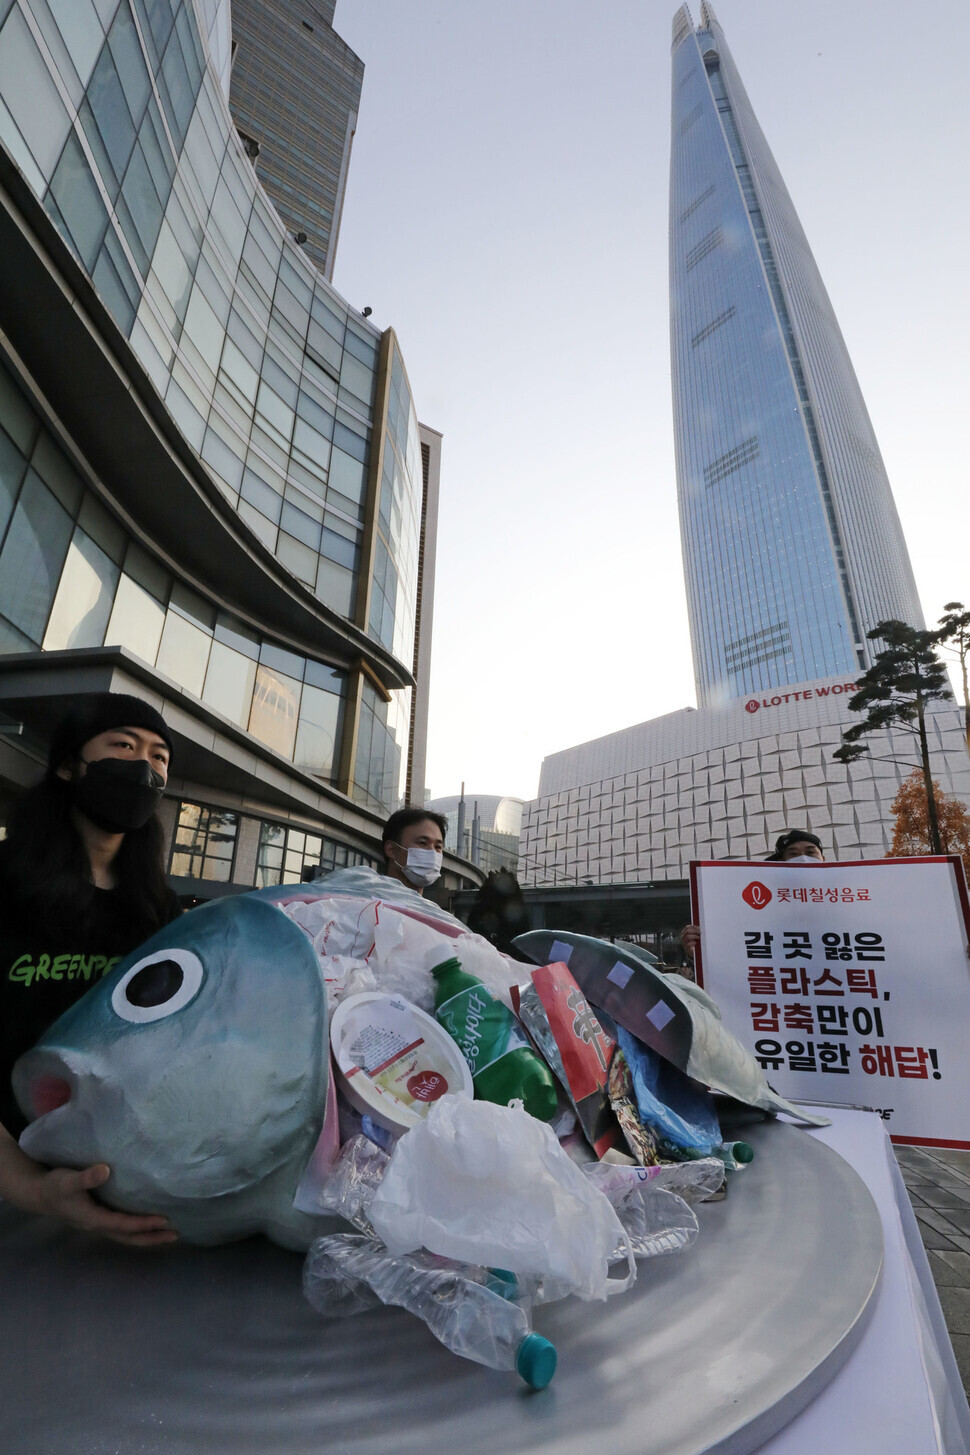 Activists with Greenpeace Korea stage a protest in front of the offices of Lotte Chilsung Beverage in Seoul’s Songpa District on Thursday, calling on food manufacturers to cut their use of plastic packaging. (Kim Hye-yun/The Hankyoreh)